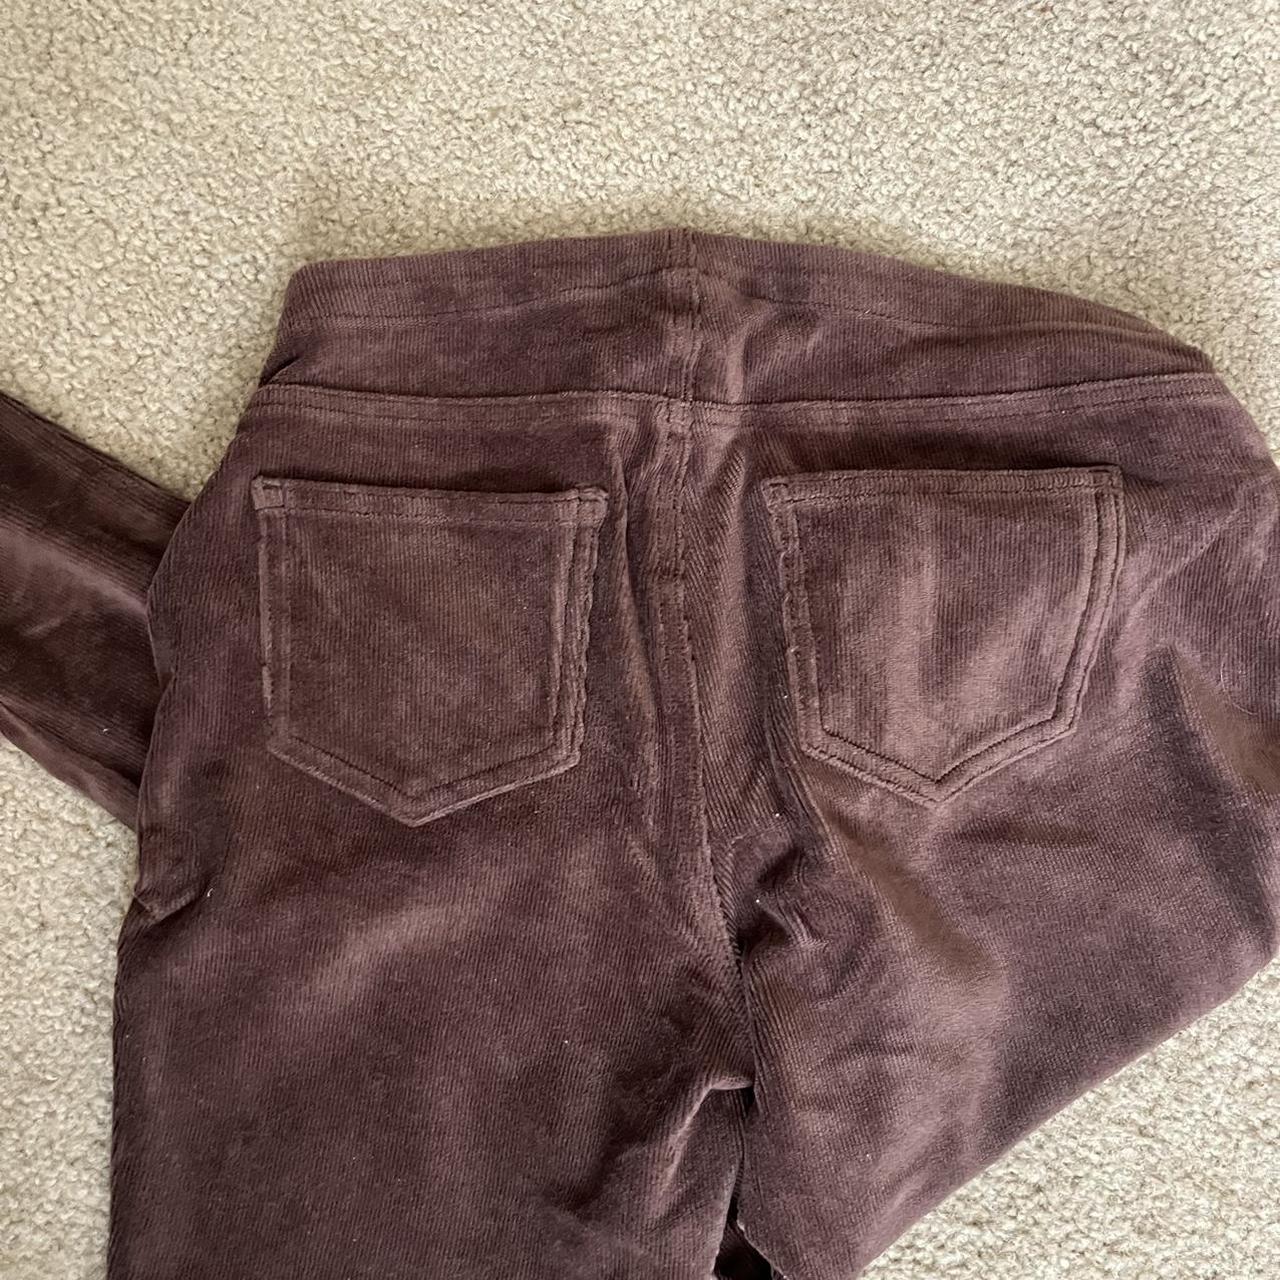 brown cozy corduroy high waisted leggings from faded - Depop